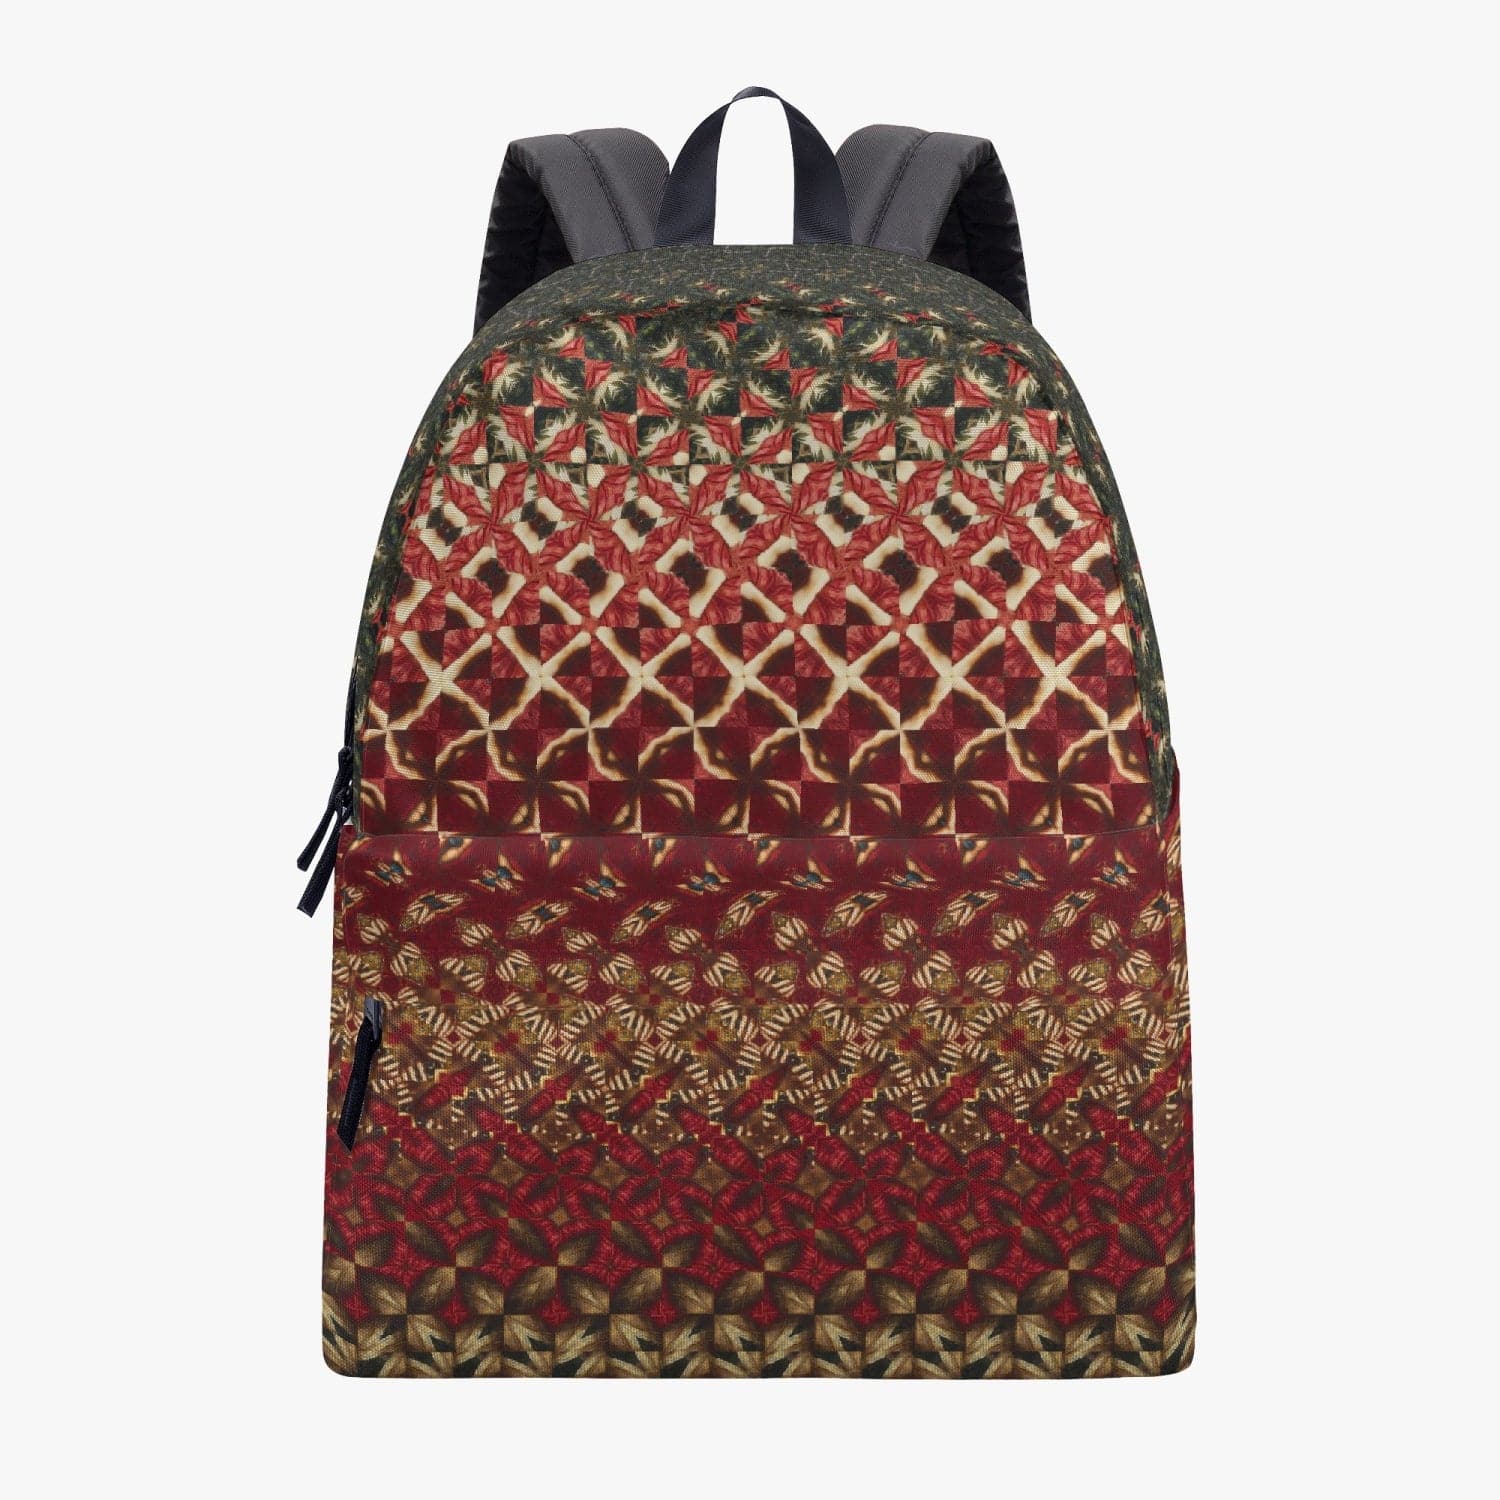 Red and Yellow patterned   Canvas Backpack, by Sensus Studio Design